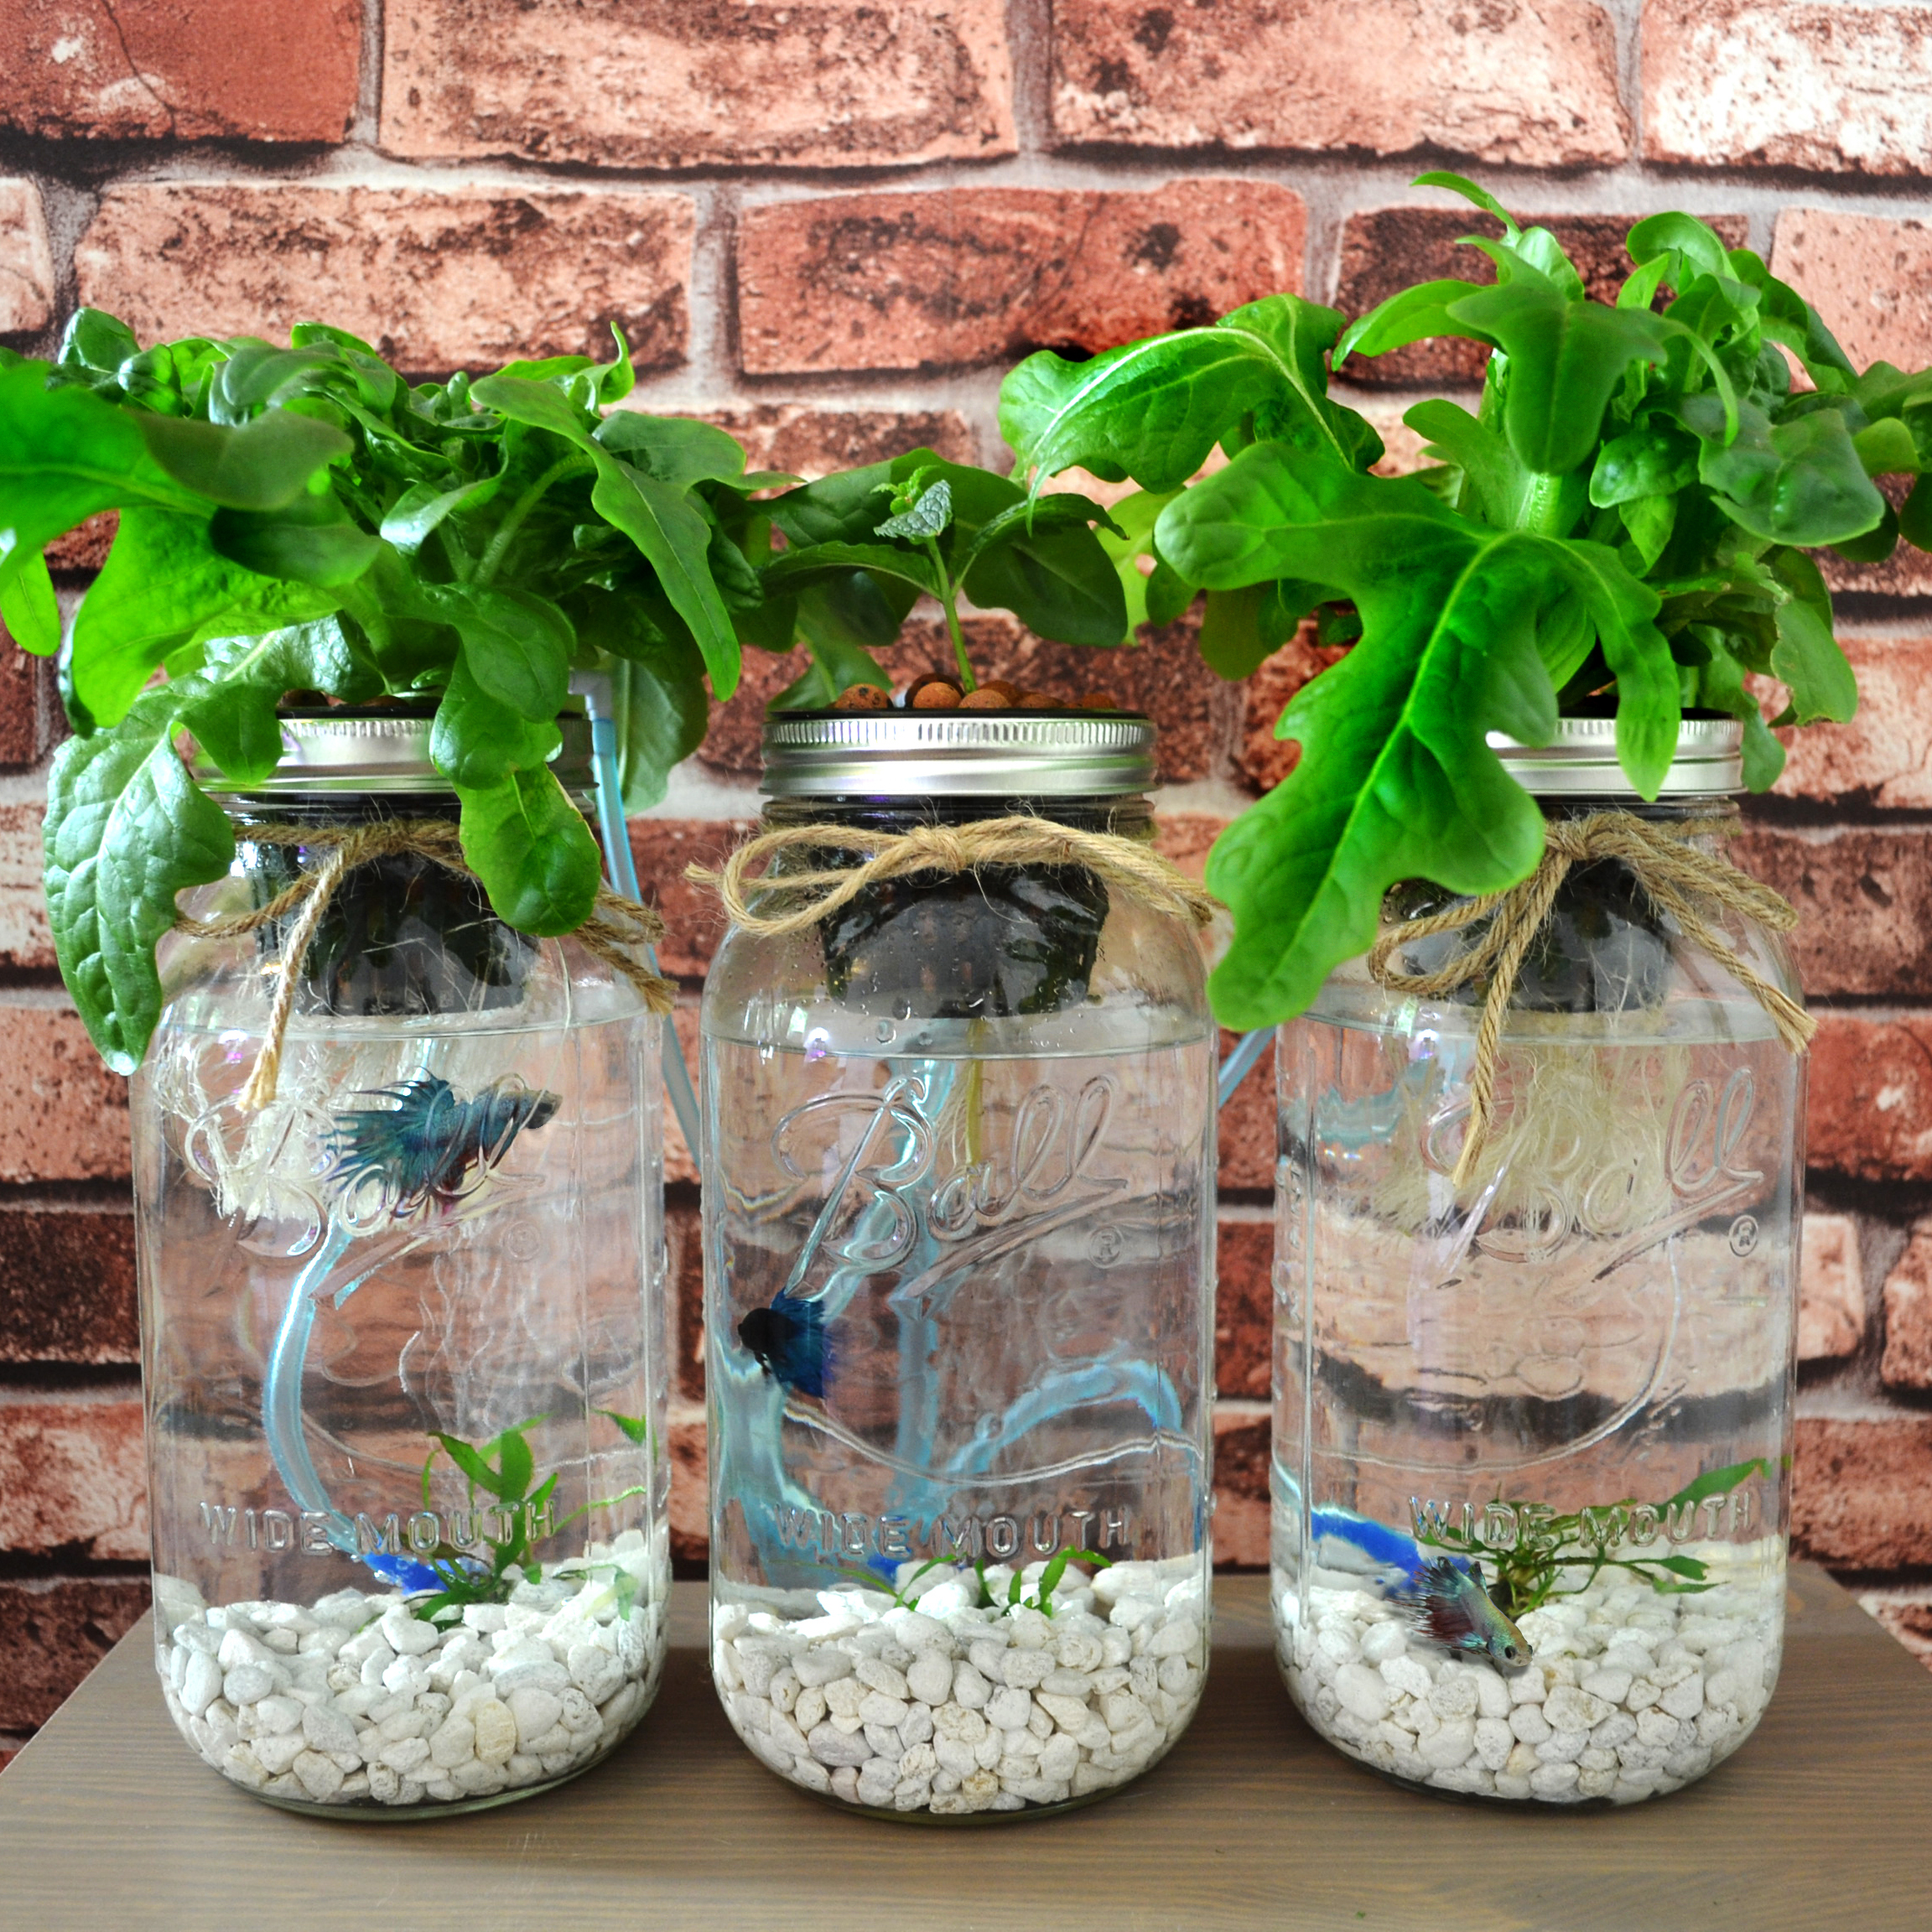 Small-Scale Aquaponics Pruning: More Room for Fish and ...